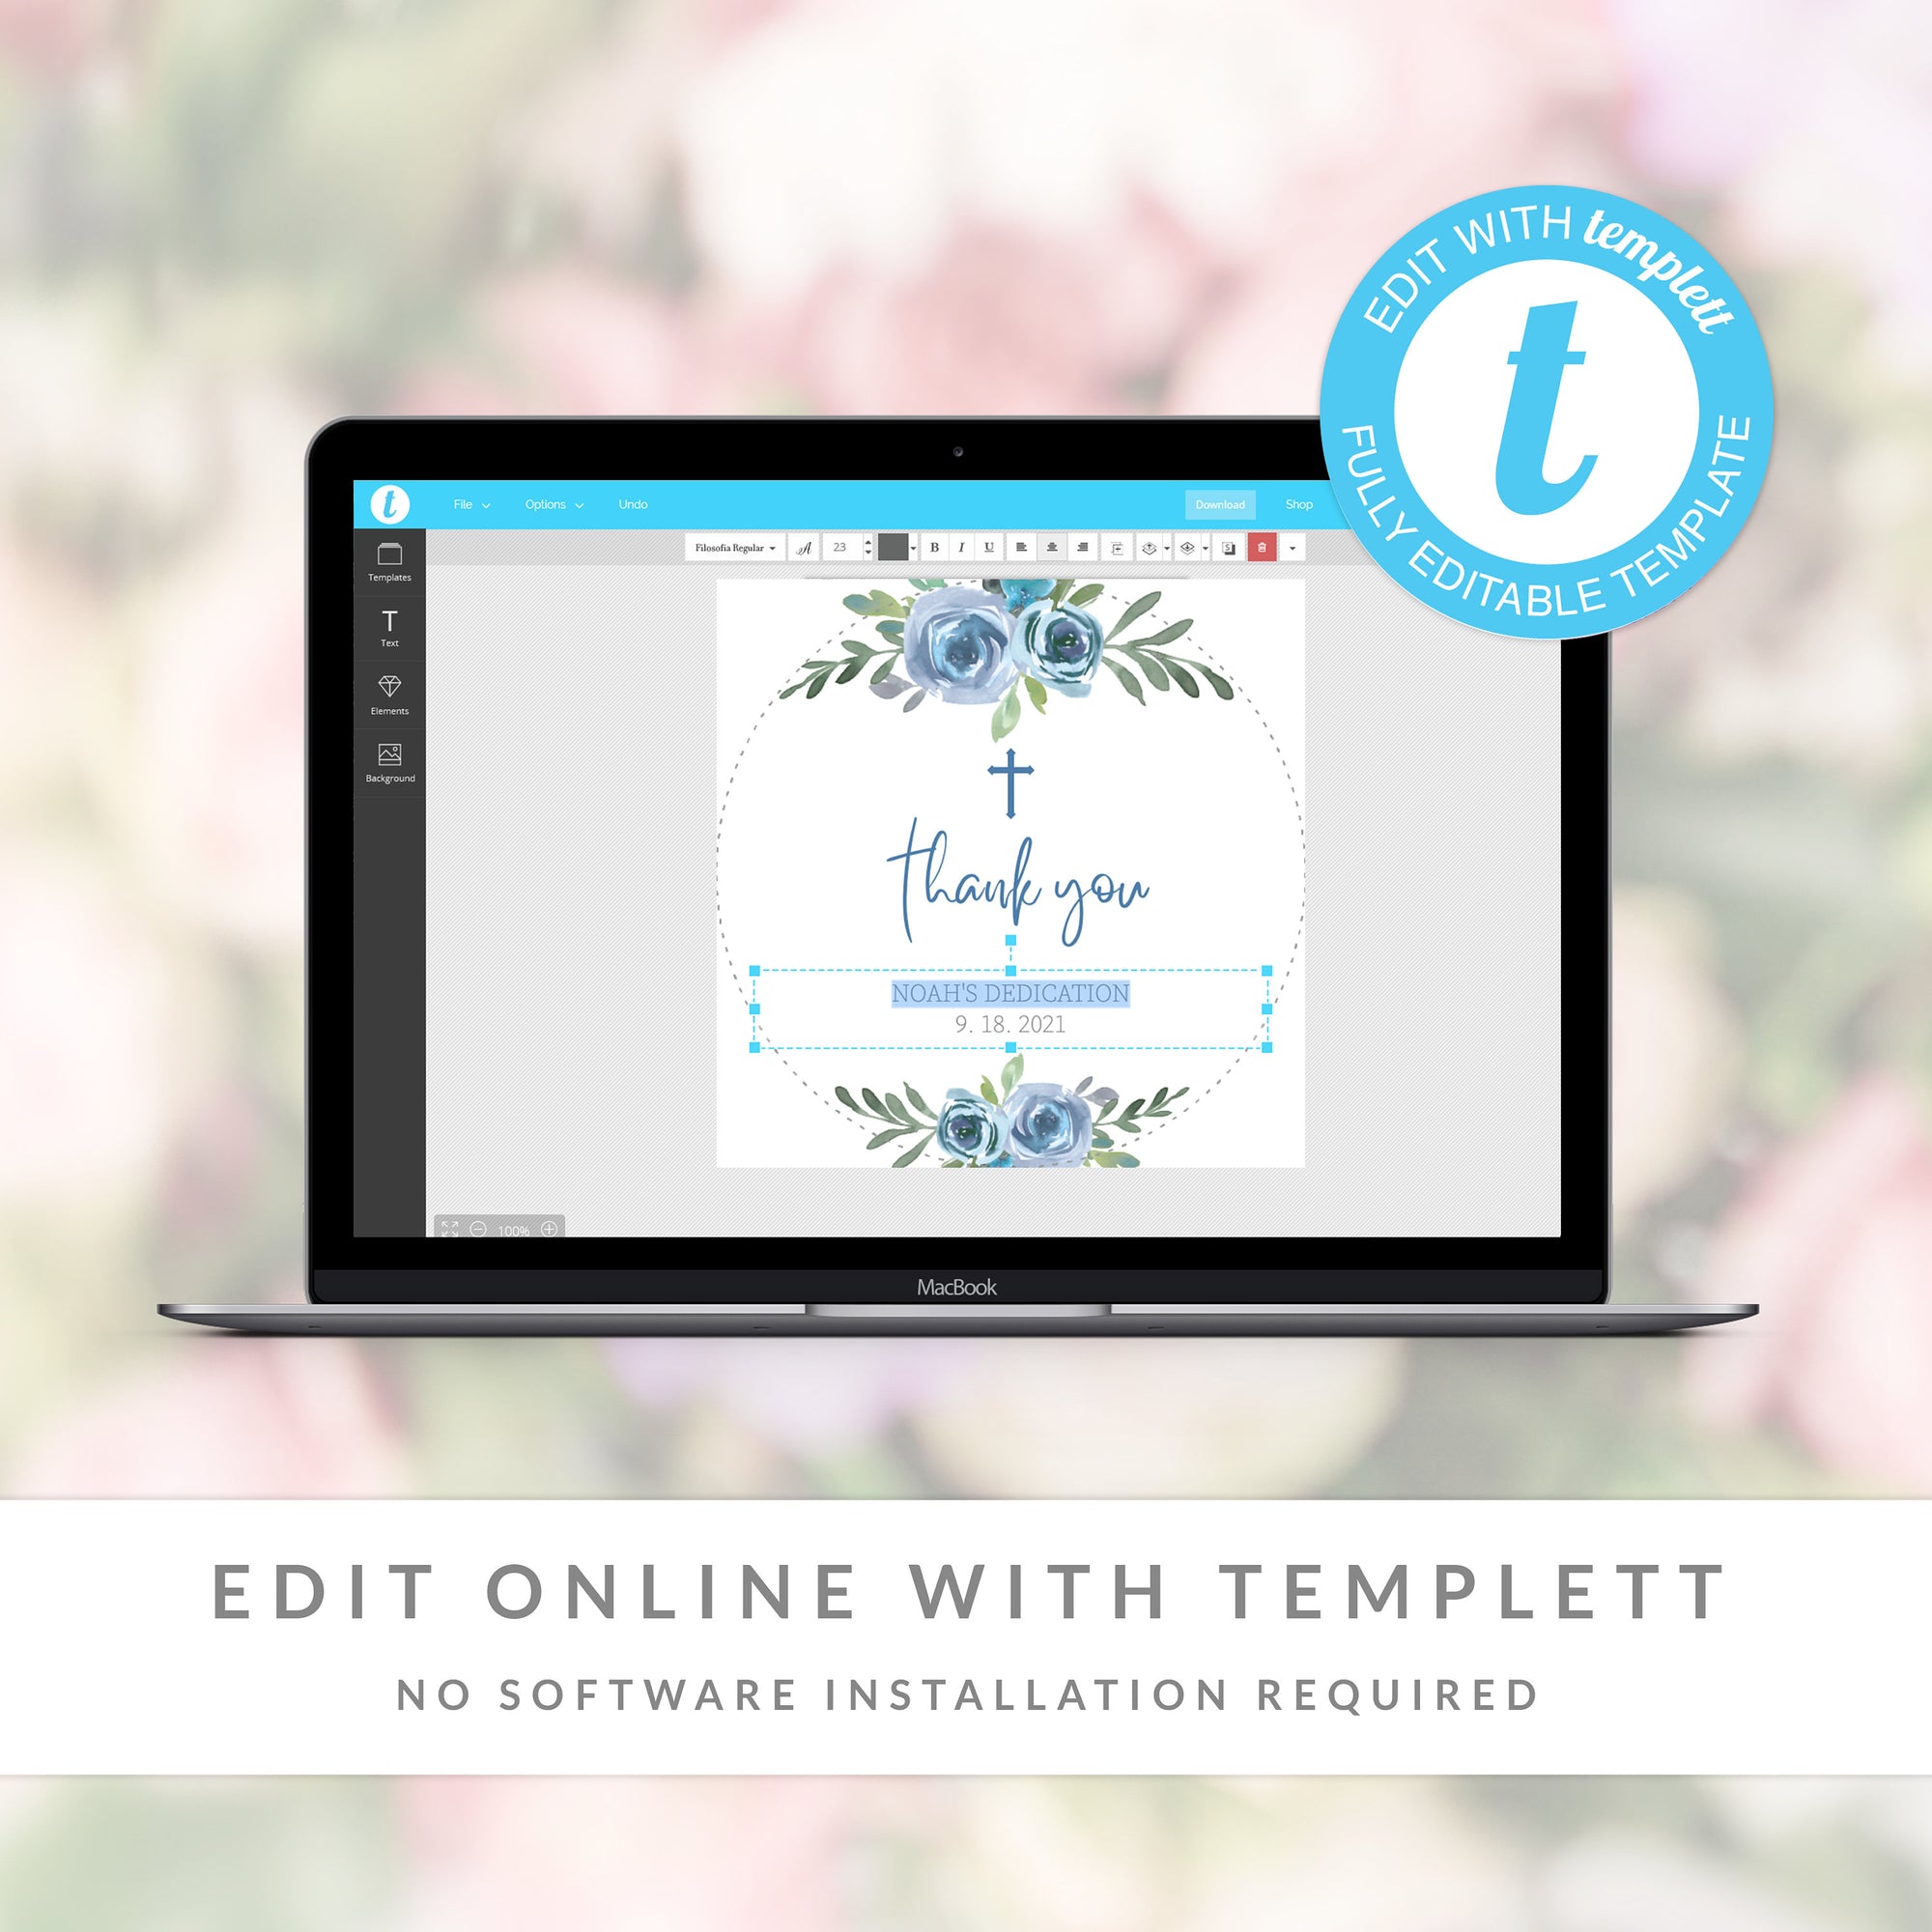 Blue Floral Dedication Favor Tag Template, Baby Dedication Thank You Tags Printable, Round Square Rectangle, Editable DIGITAL DOWNLOAD BF100